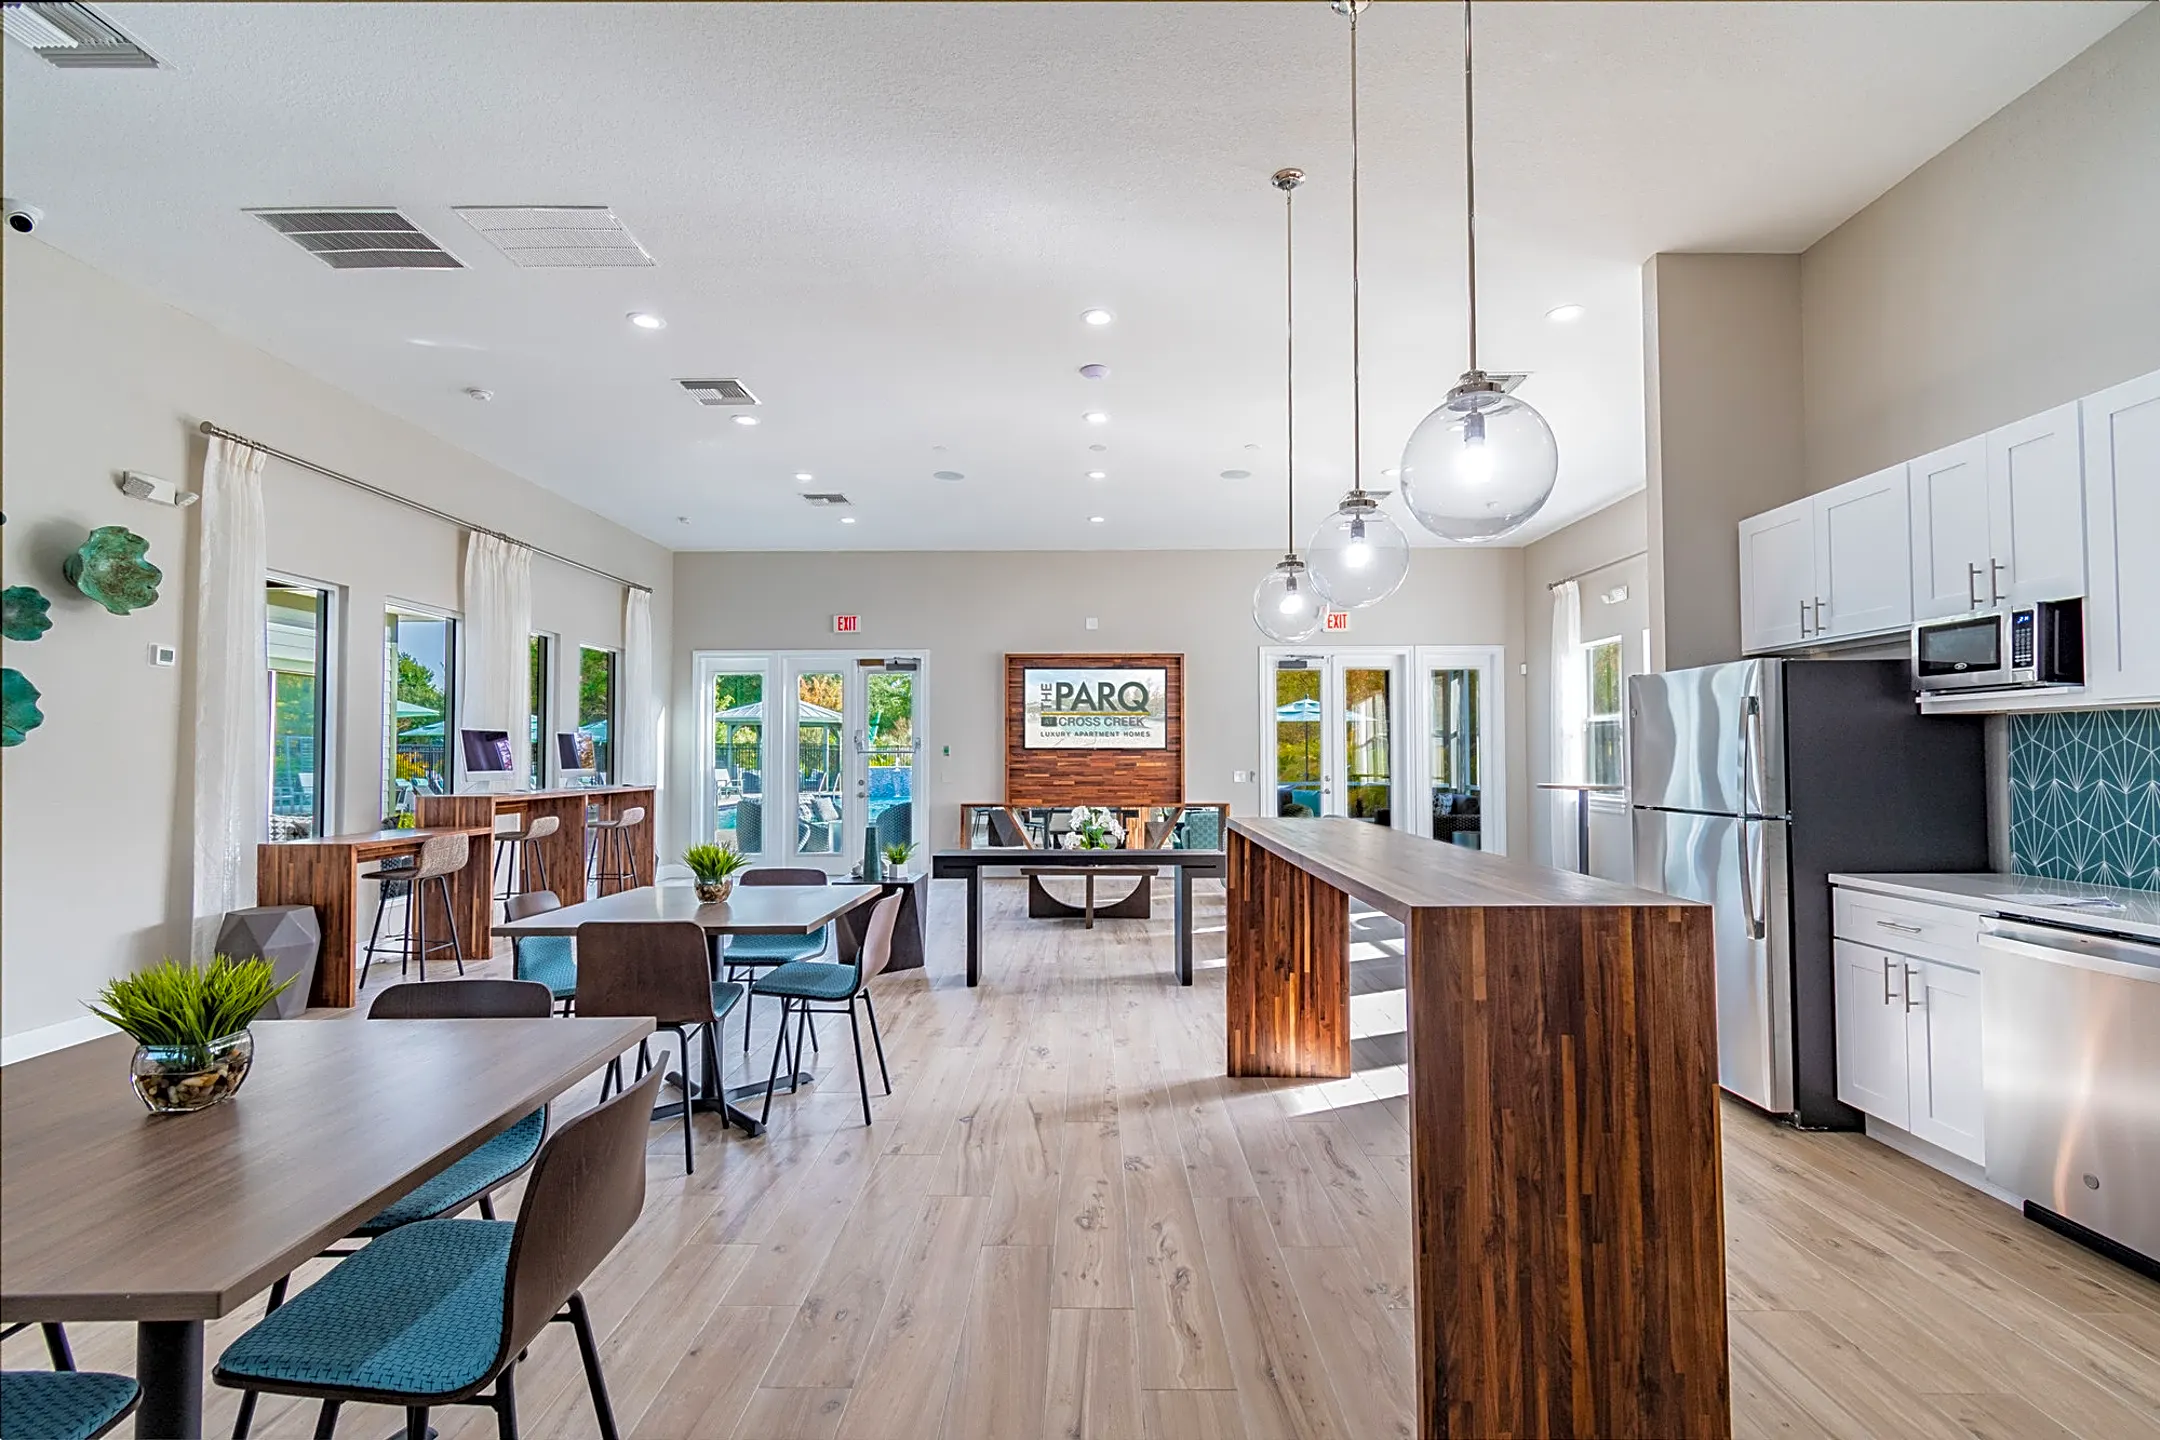 Dining Room - The Parq at Cross Creek - Tampa, FL